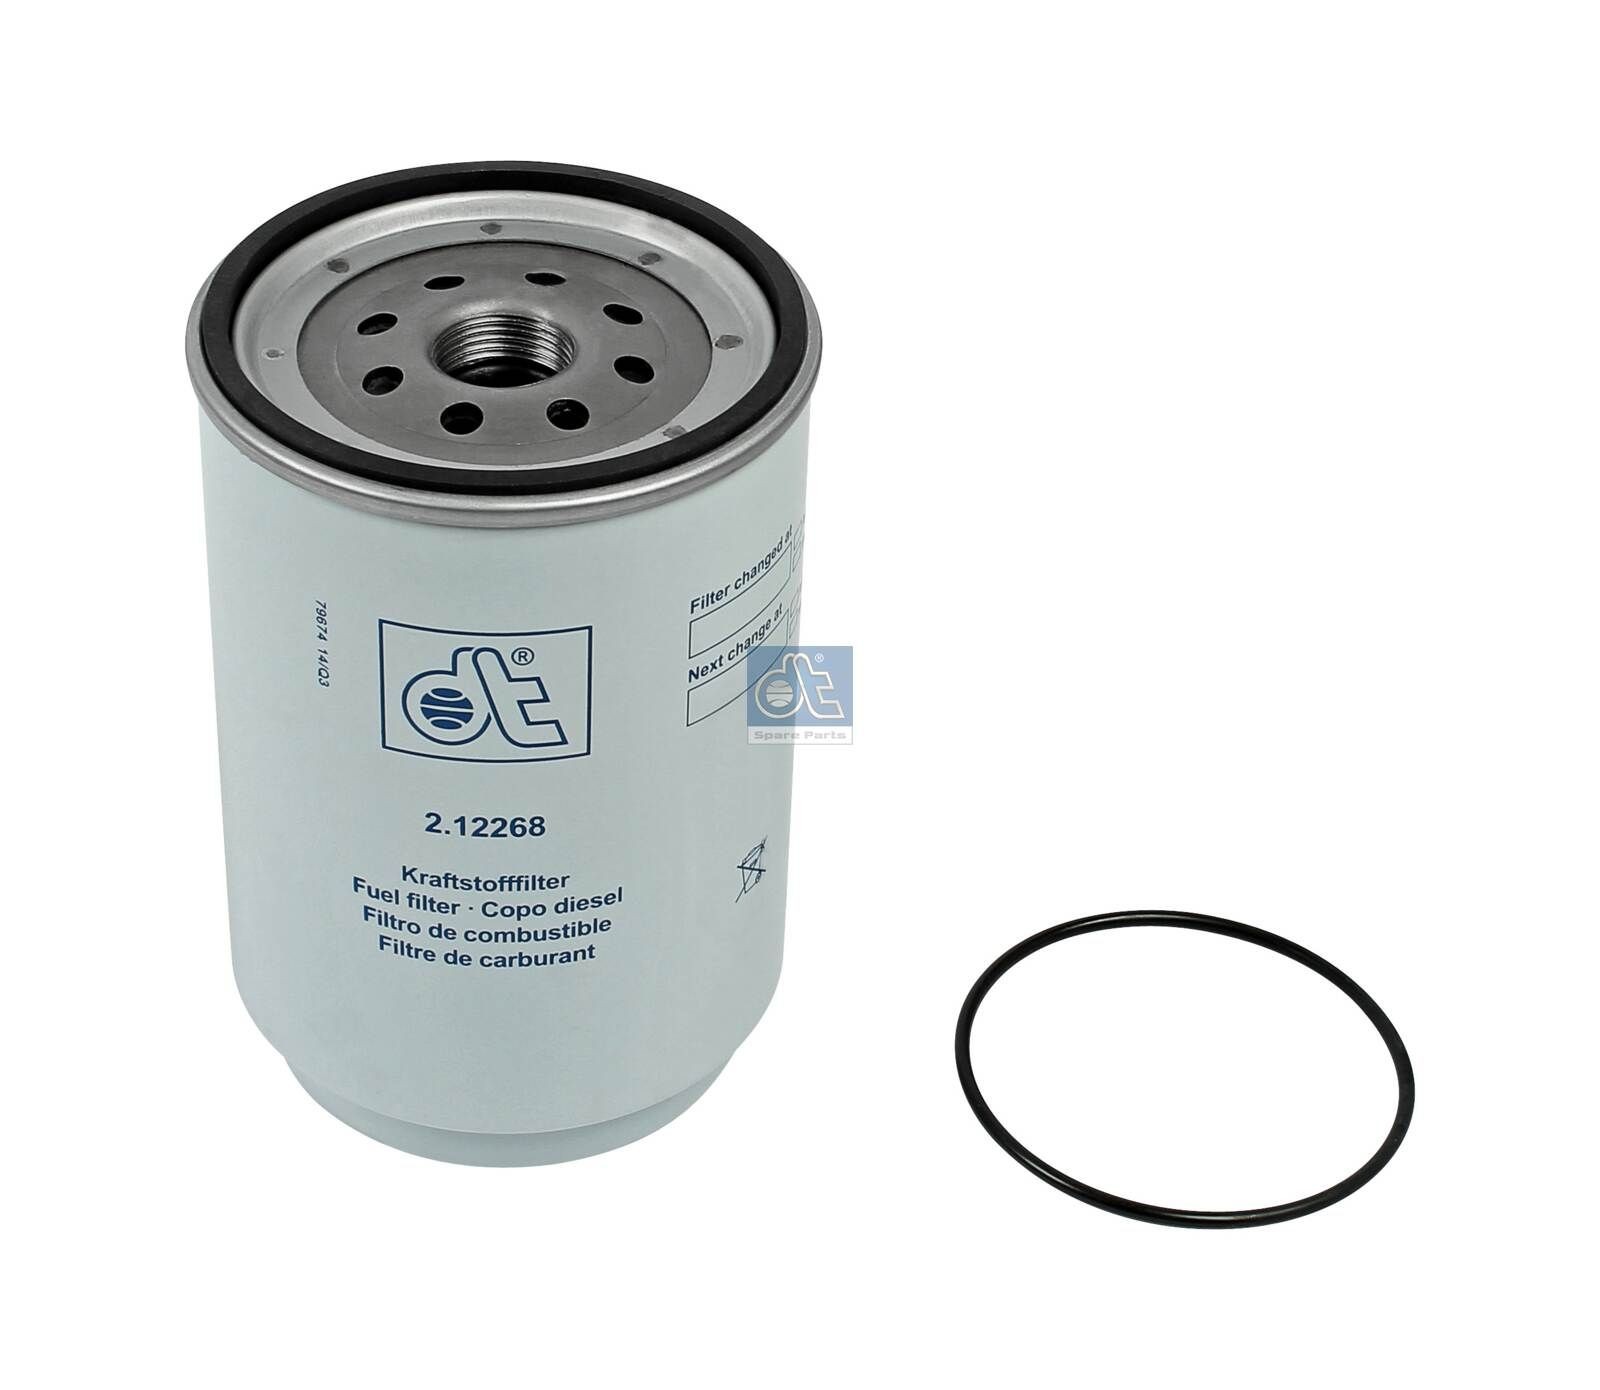 WK 11 001 x DT Spare Parts 2.12268 Fuel filter 20 99 8349